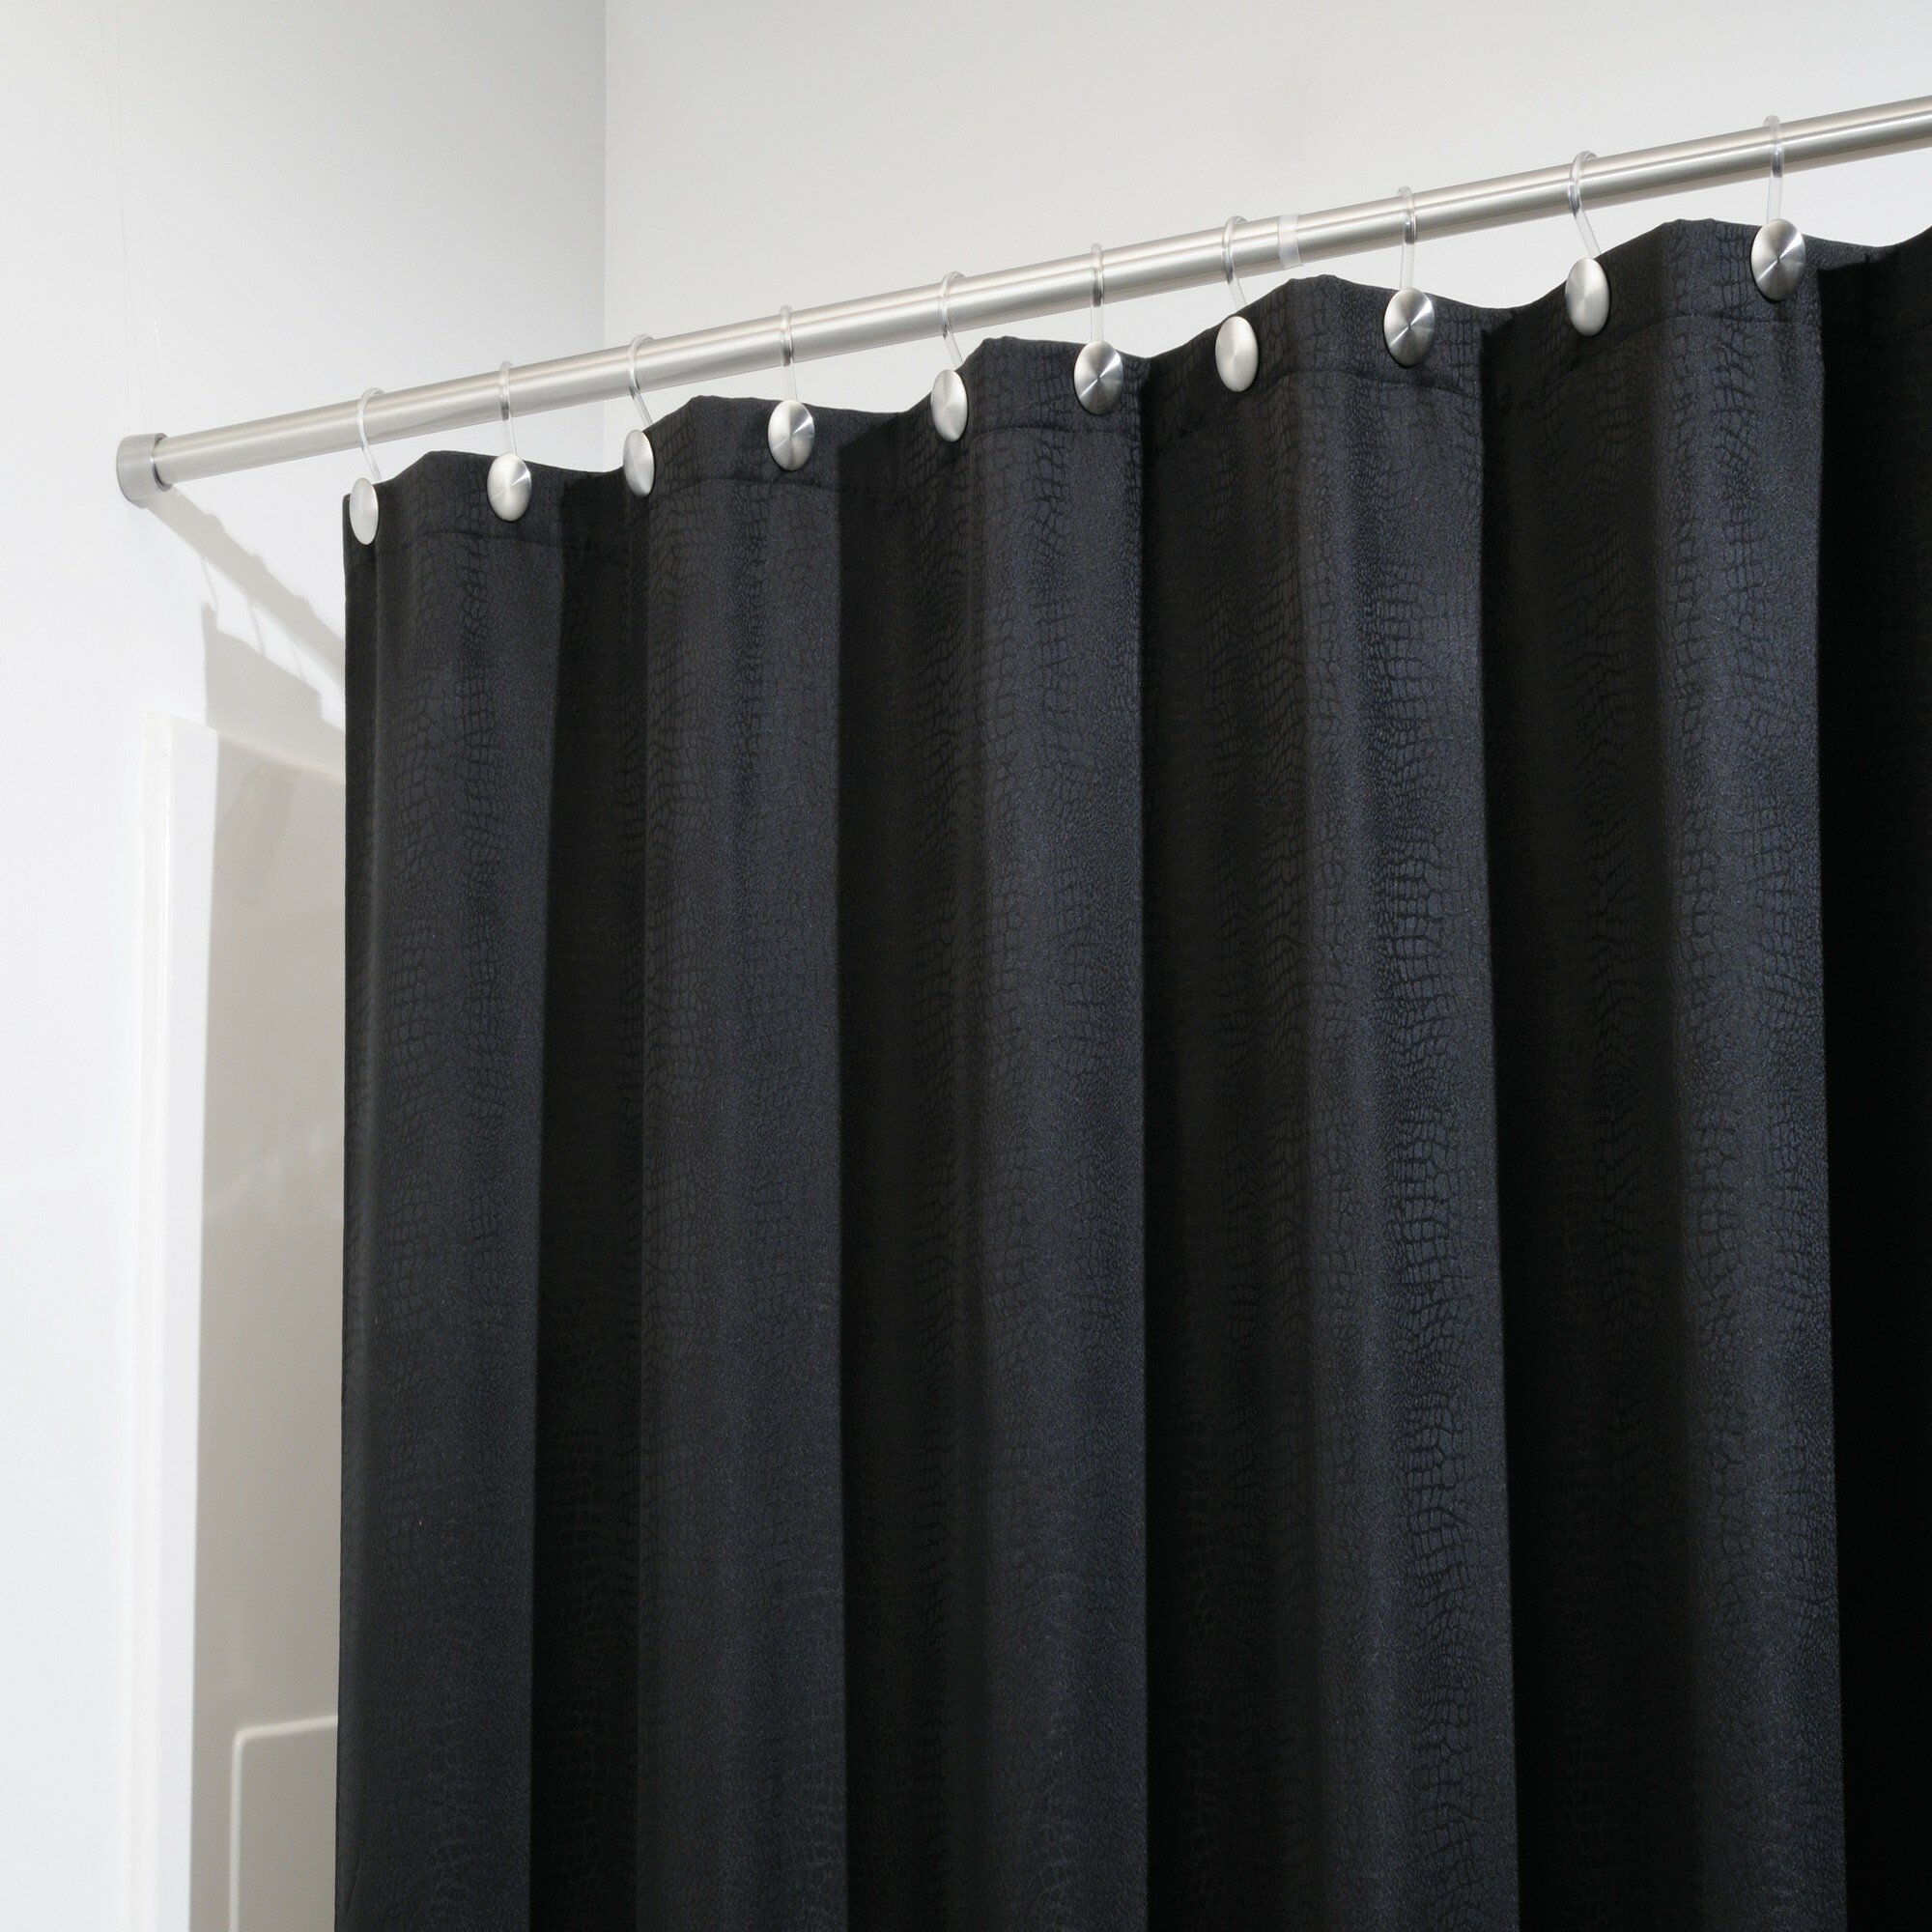 Tension Shower Curtain Rods | Shower Curtain Rod Length | Shower Curtain Tension Rod